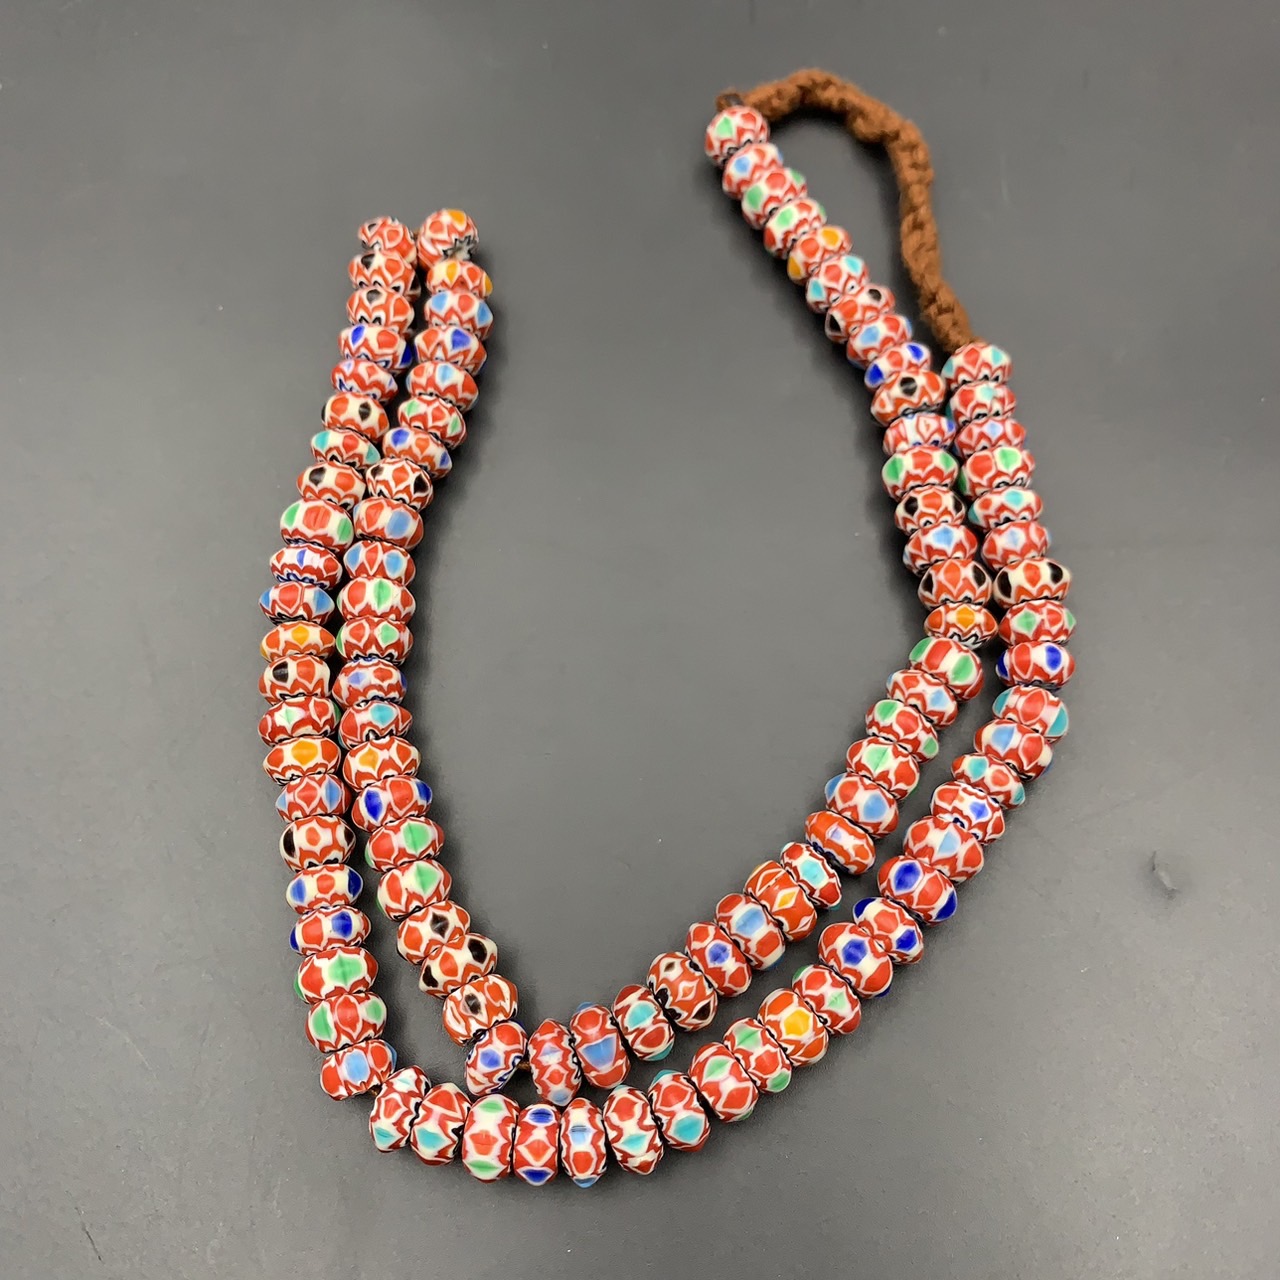 Wonderful Tiny Vintage Chevron Trade African Glass Beads Strand, LPBR-0311 - Image 9 of 11